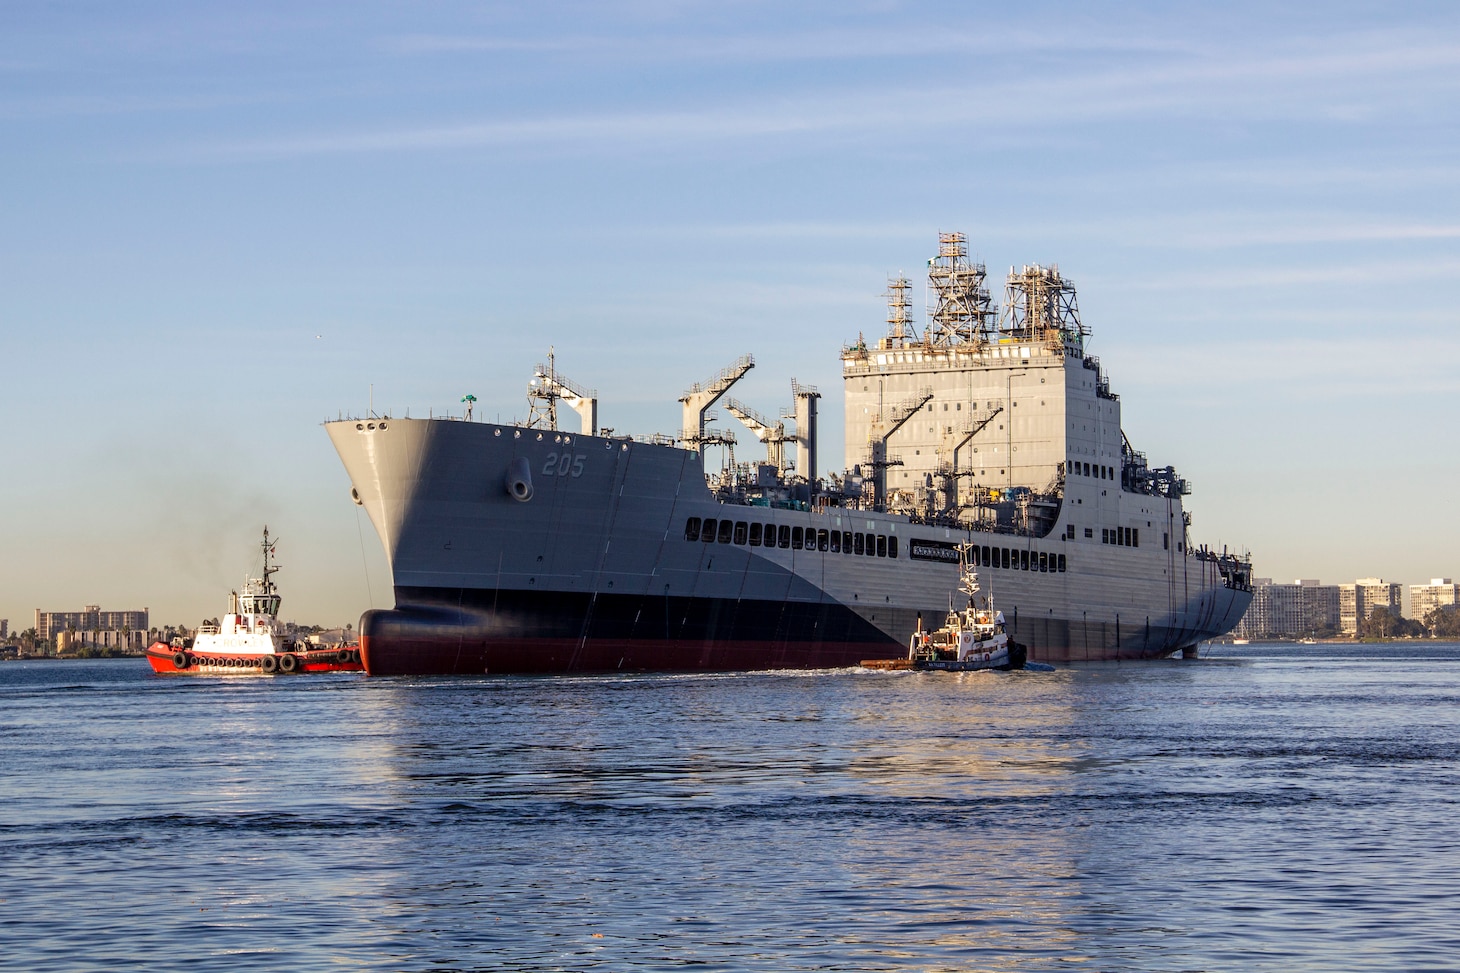 General Dynamics NASSCO launched the future USNS John Lewis (T-AO 205), the first of six vessels in the John Lewis-class fleet oiler program designed to support the U.S. Navy.